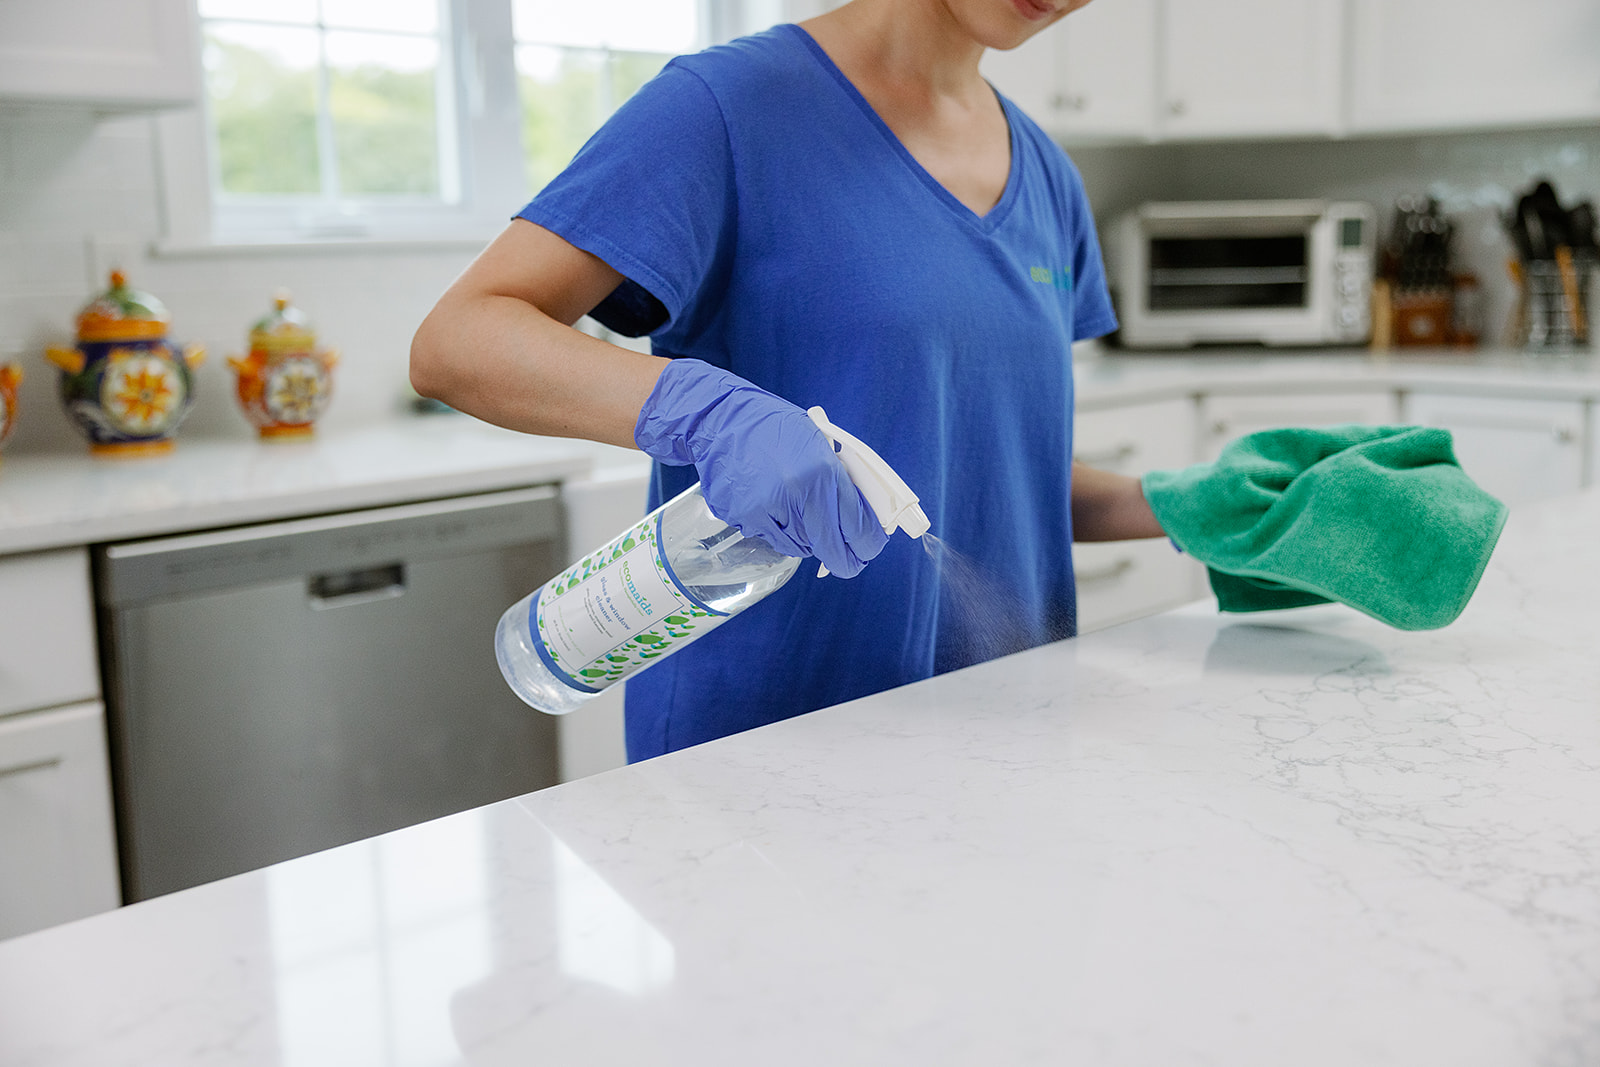 Maid Services in The Woodlands